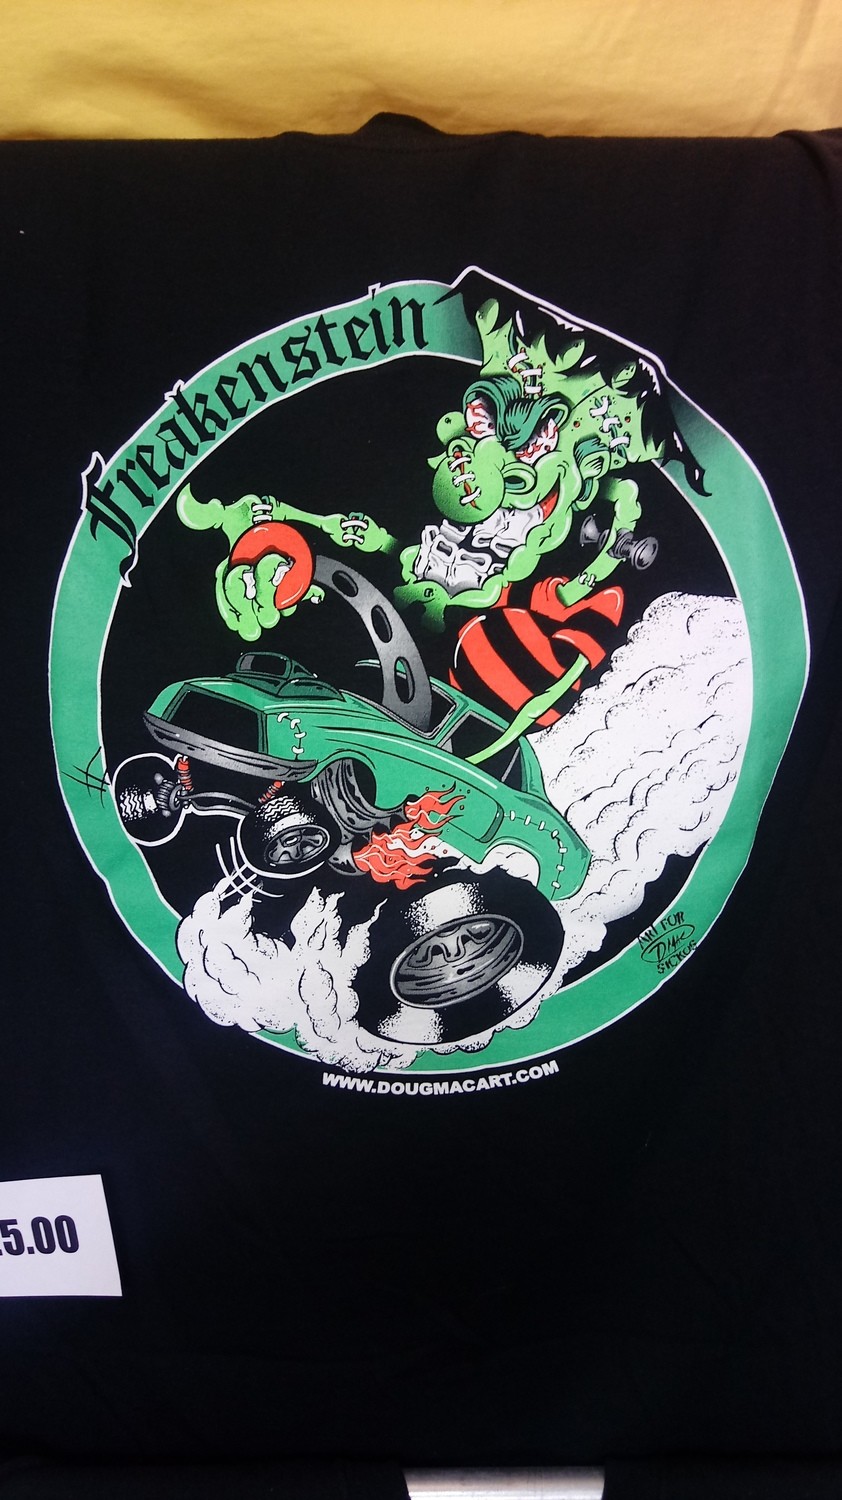 Freakenstein Mustang T-SHIRT $25 Includes Shipping